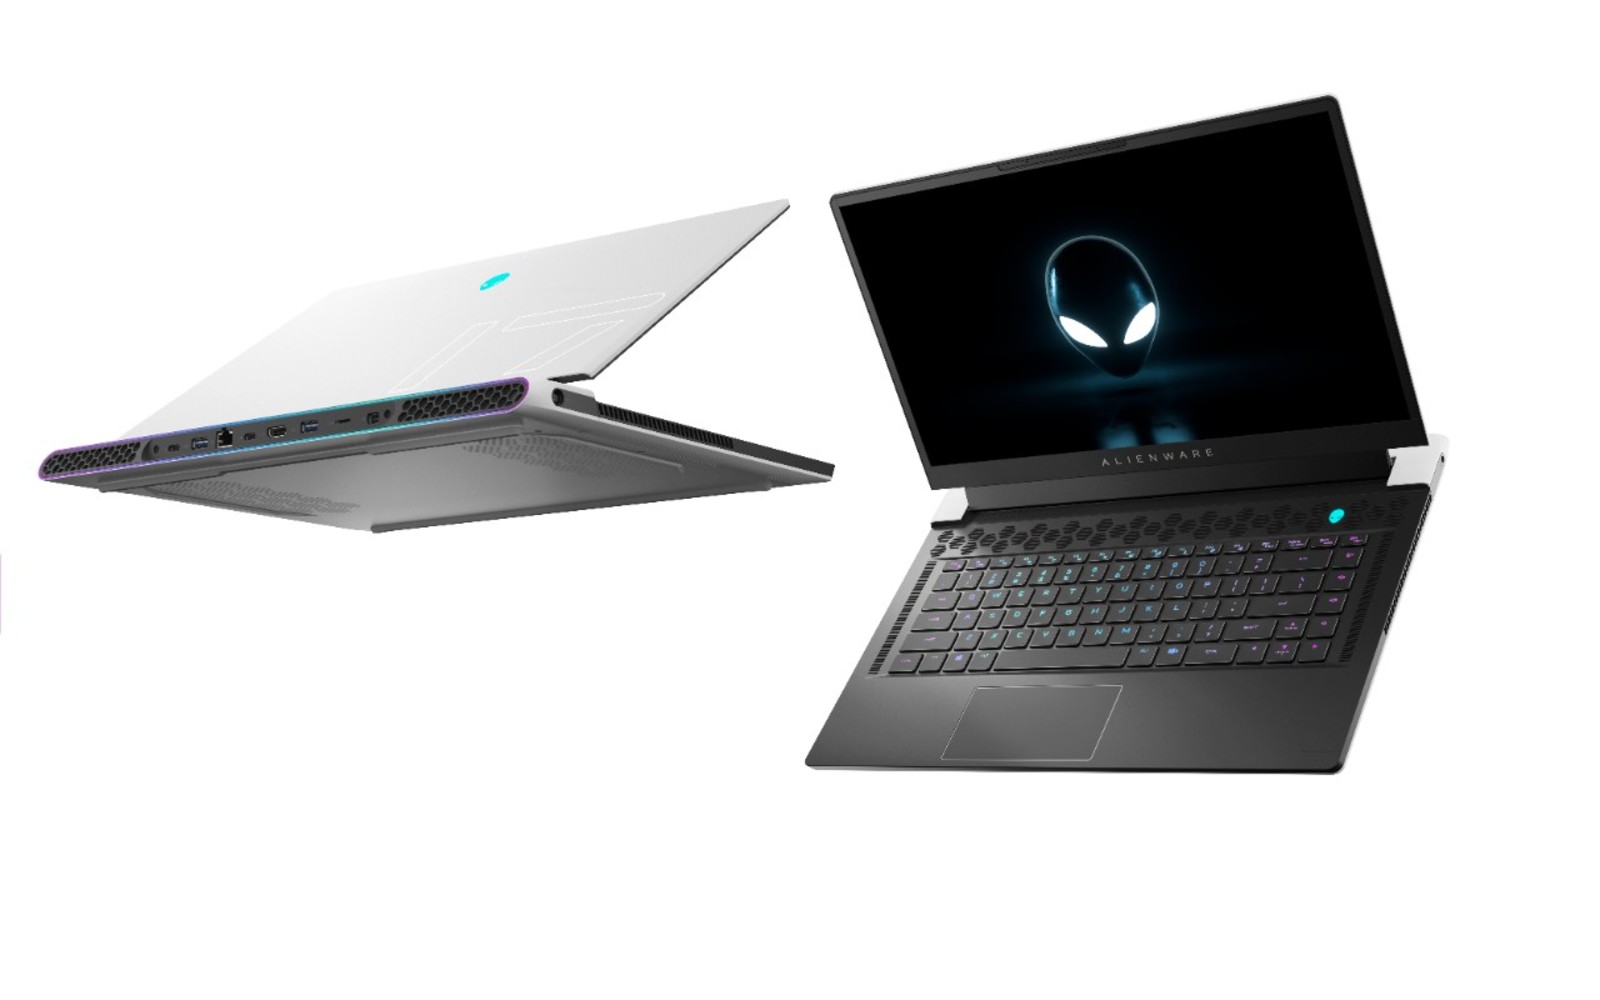 Alienware's x15 and x17 cram Intel H-series CPUs and RTX 30 graphics into thin frames